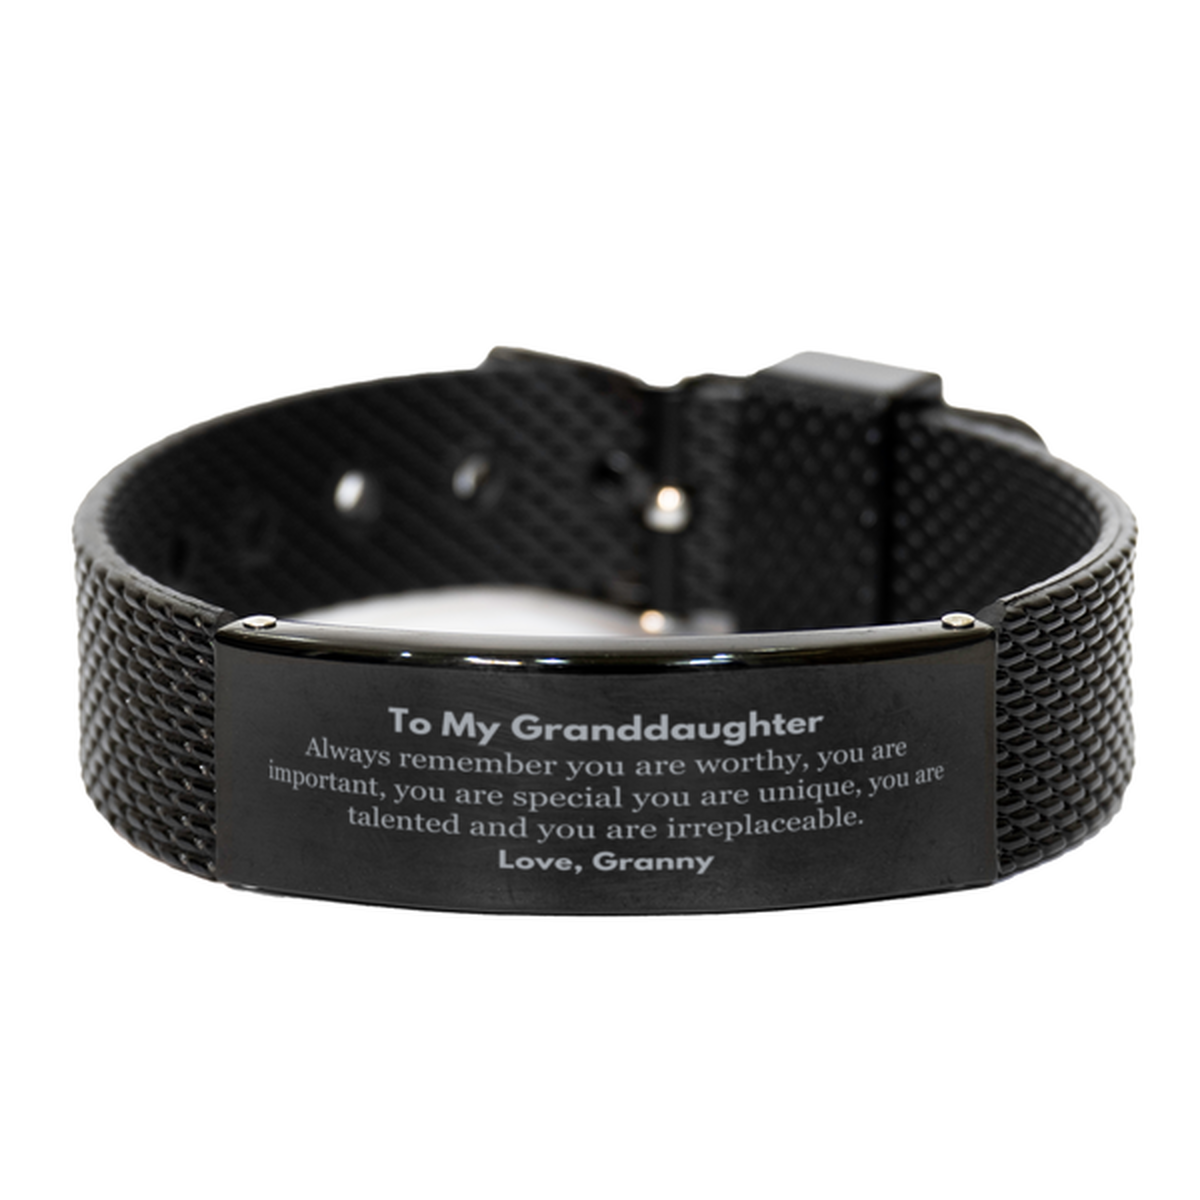 Granddaughter Birthday Gifts from Granny, Inspirational Black Shark Mesh Bracelet for Granddaughter Christmas Graduation Gifts for Granddaughter Always remember you are worthy, you are important. Love, Granny